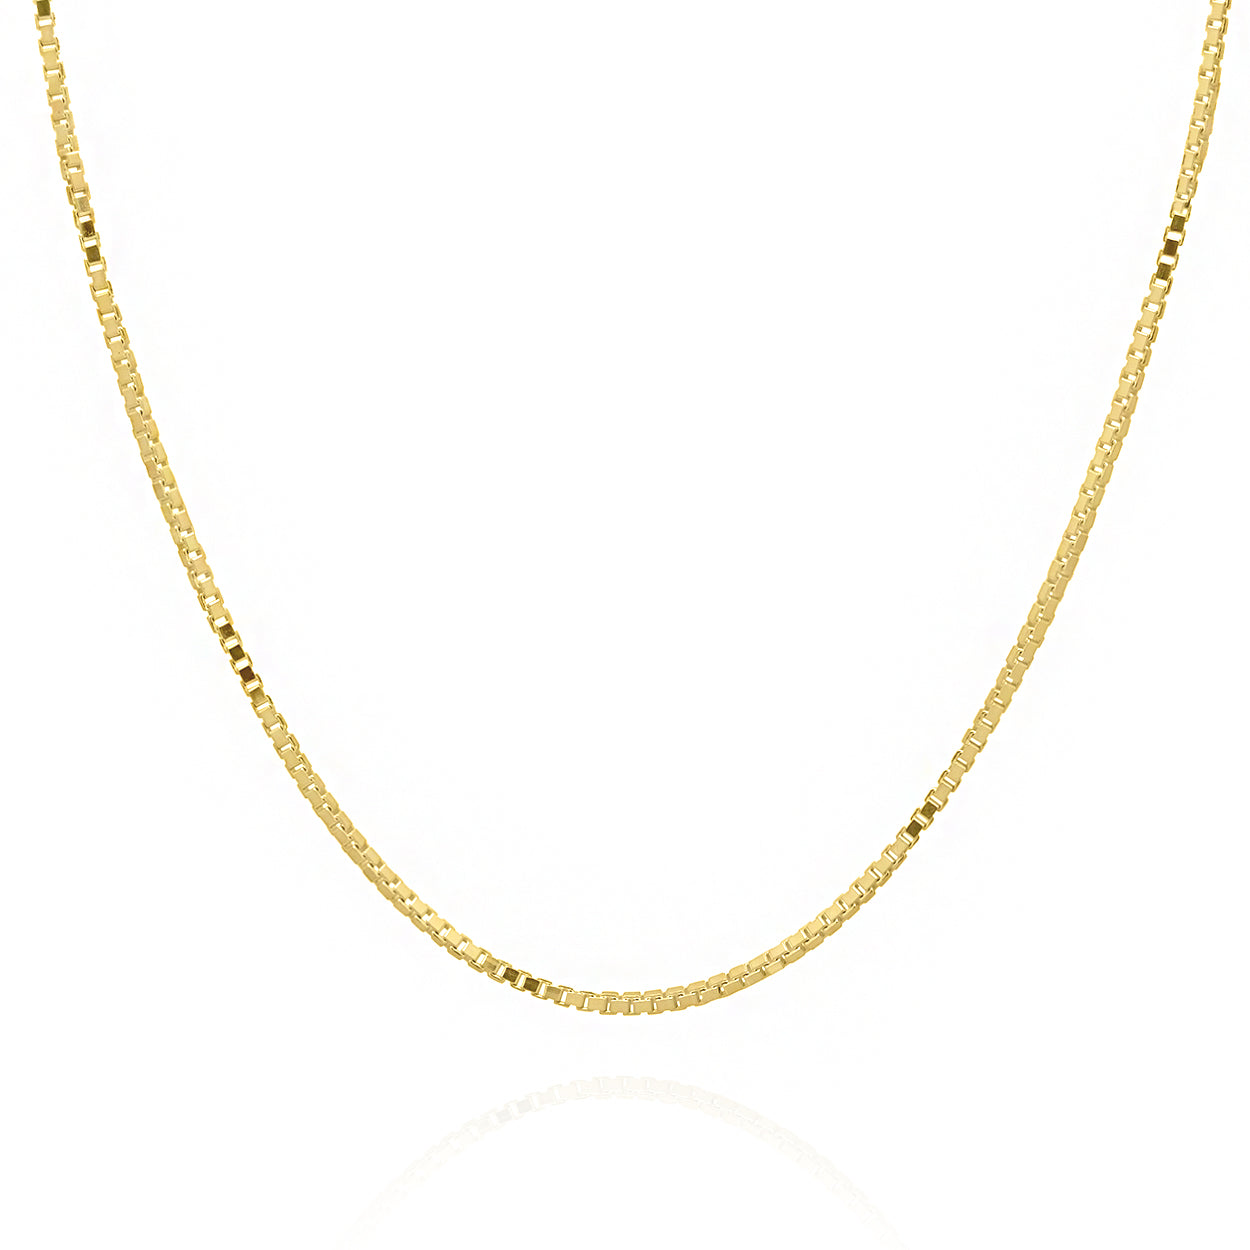 1.5mm Wide Box Style Chain Solid Gold Yellow